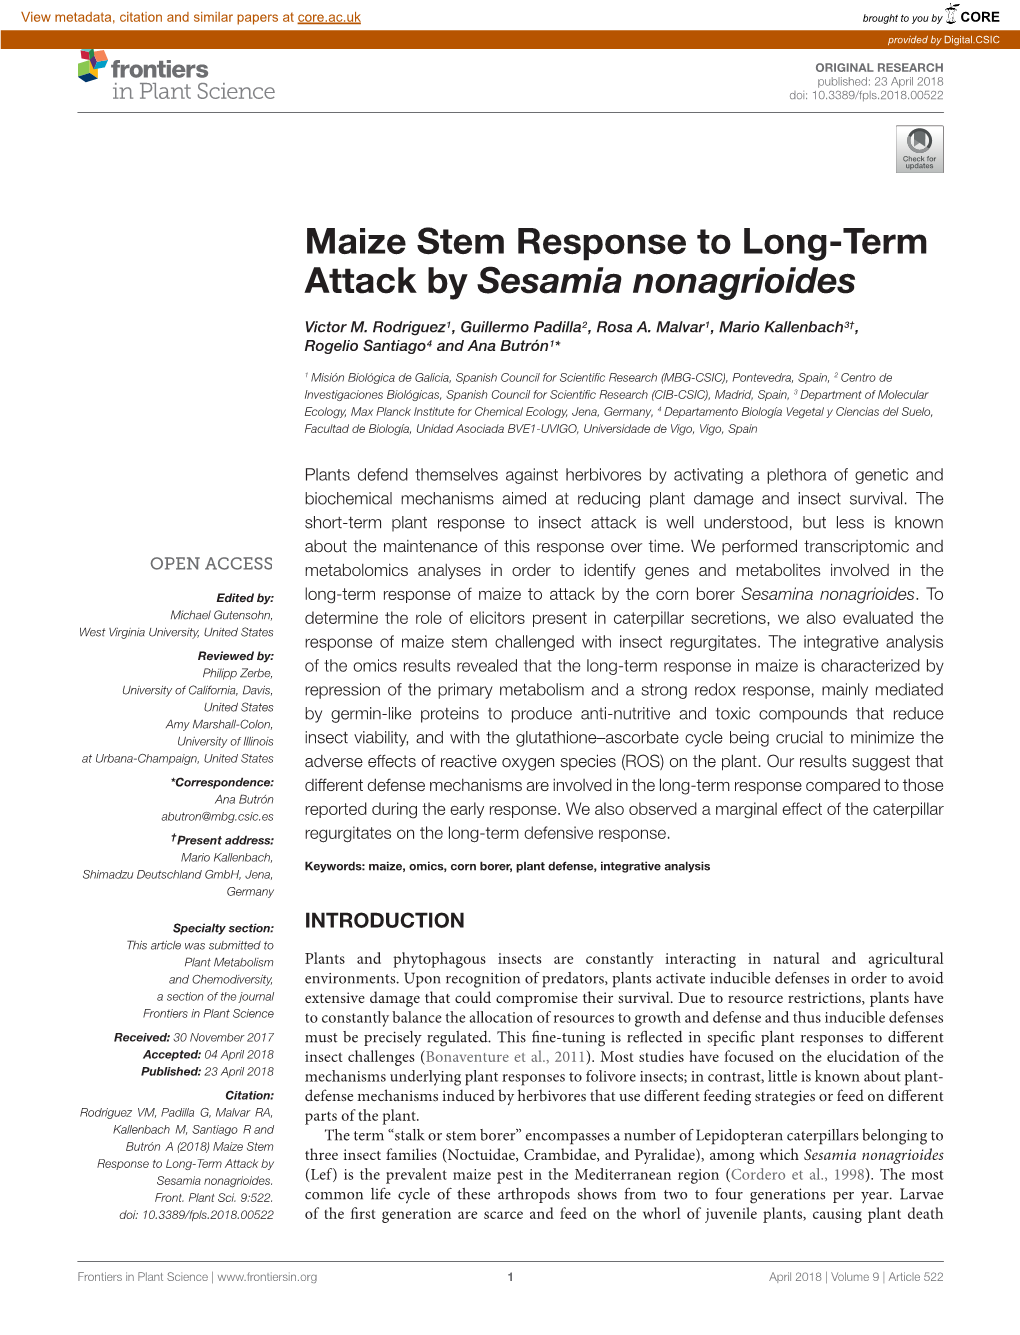 Maize Stem Response to Long-Term Attack by Sesamia Nonagrioides